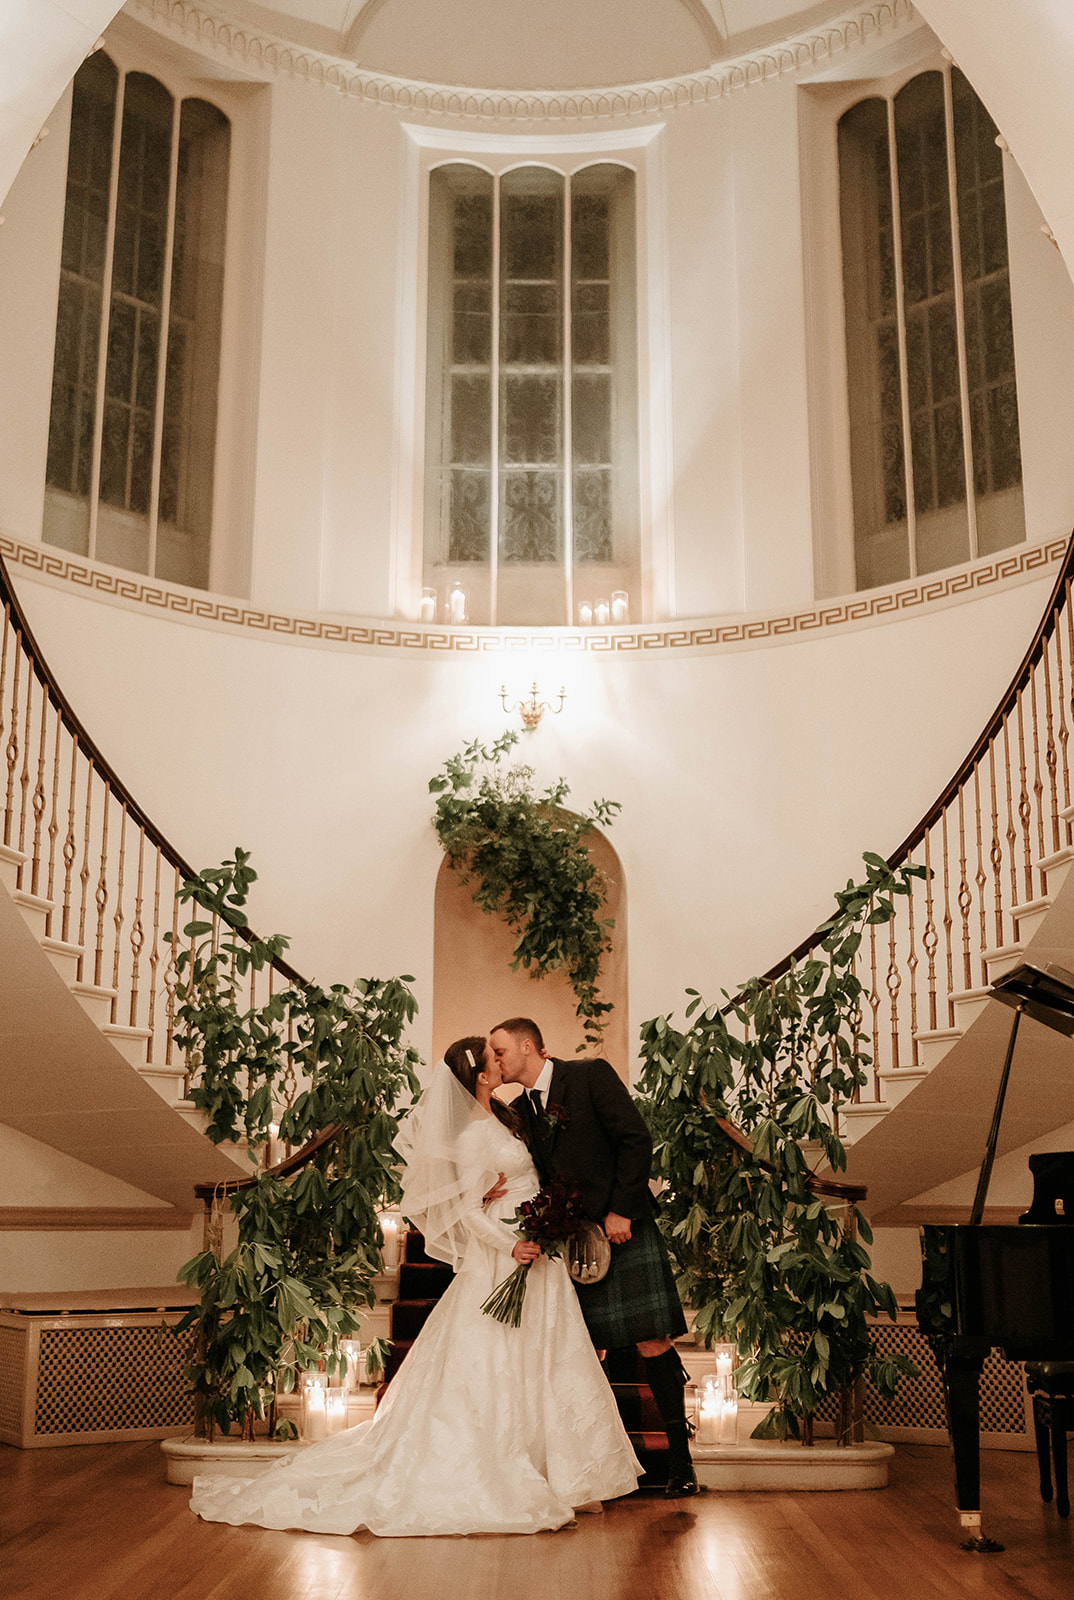 A couple infront of the grand staircase at Fasque House